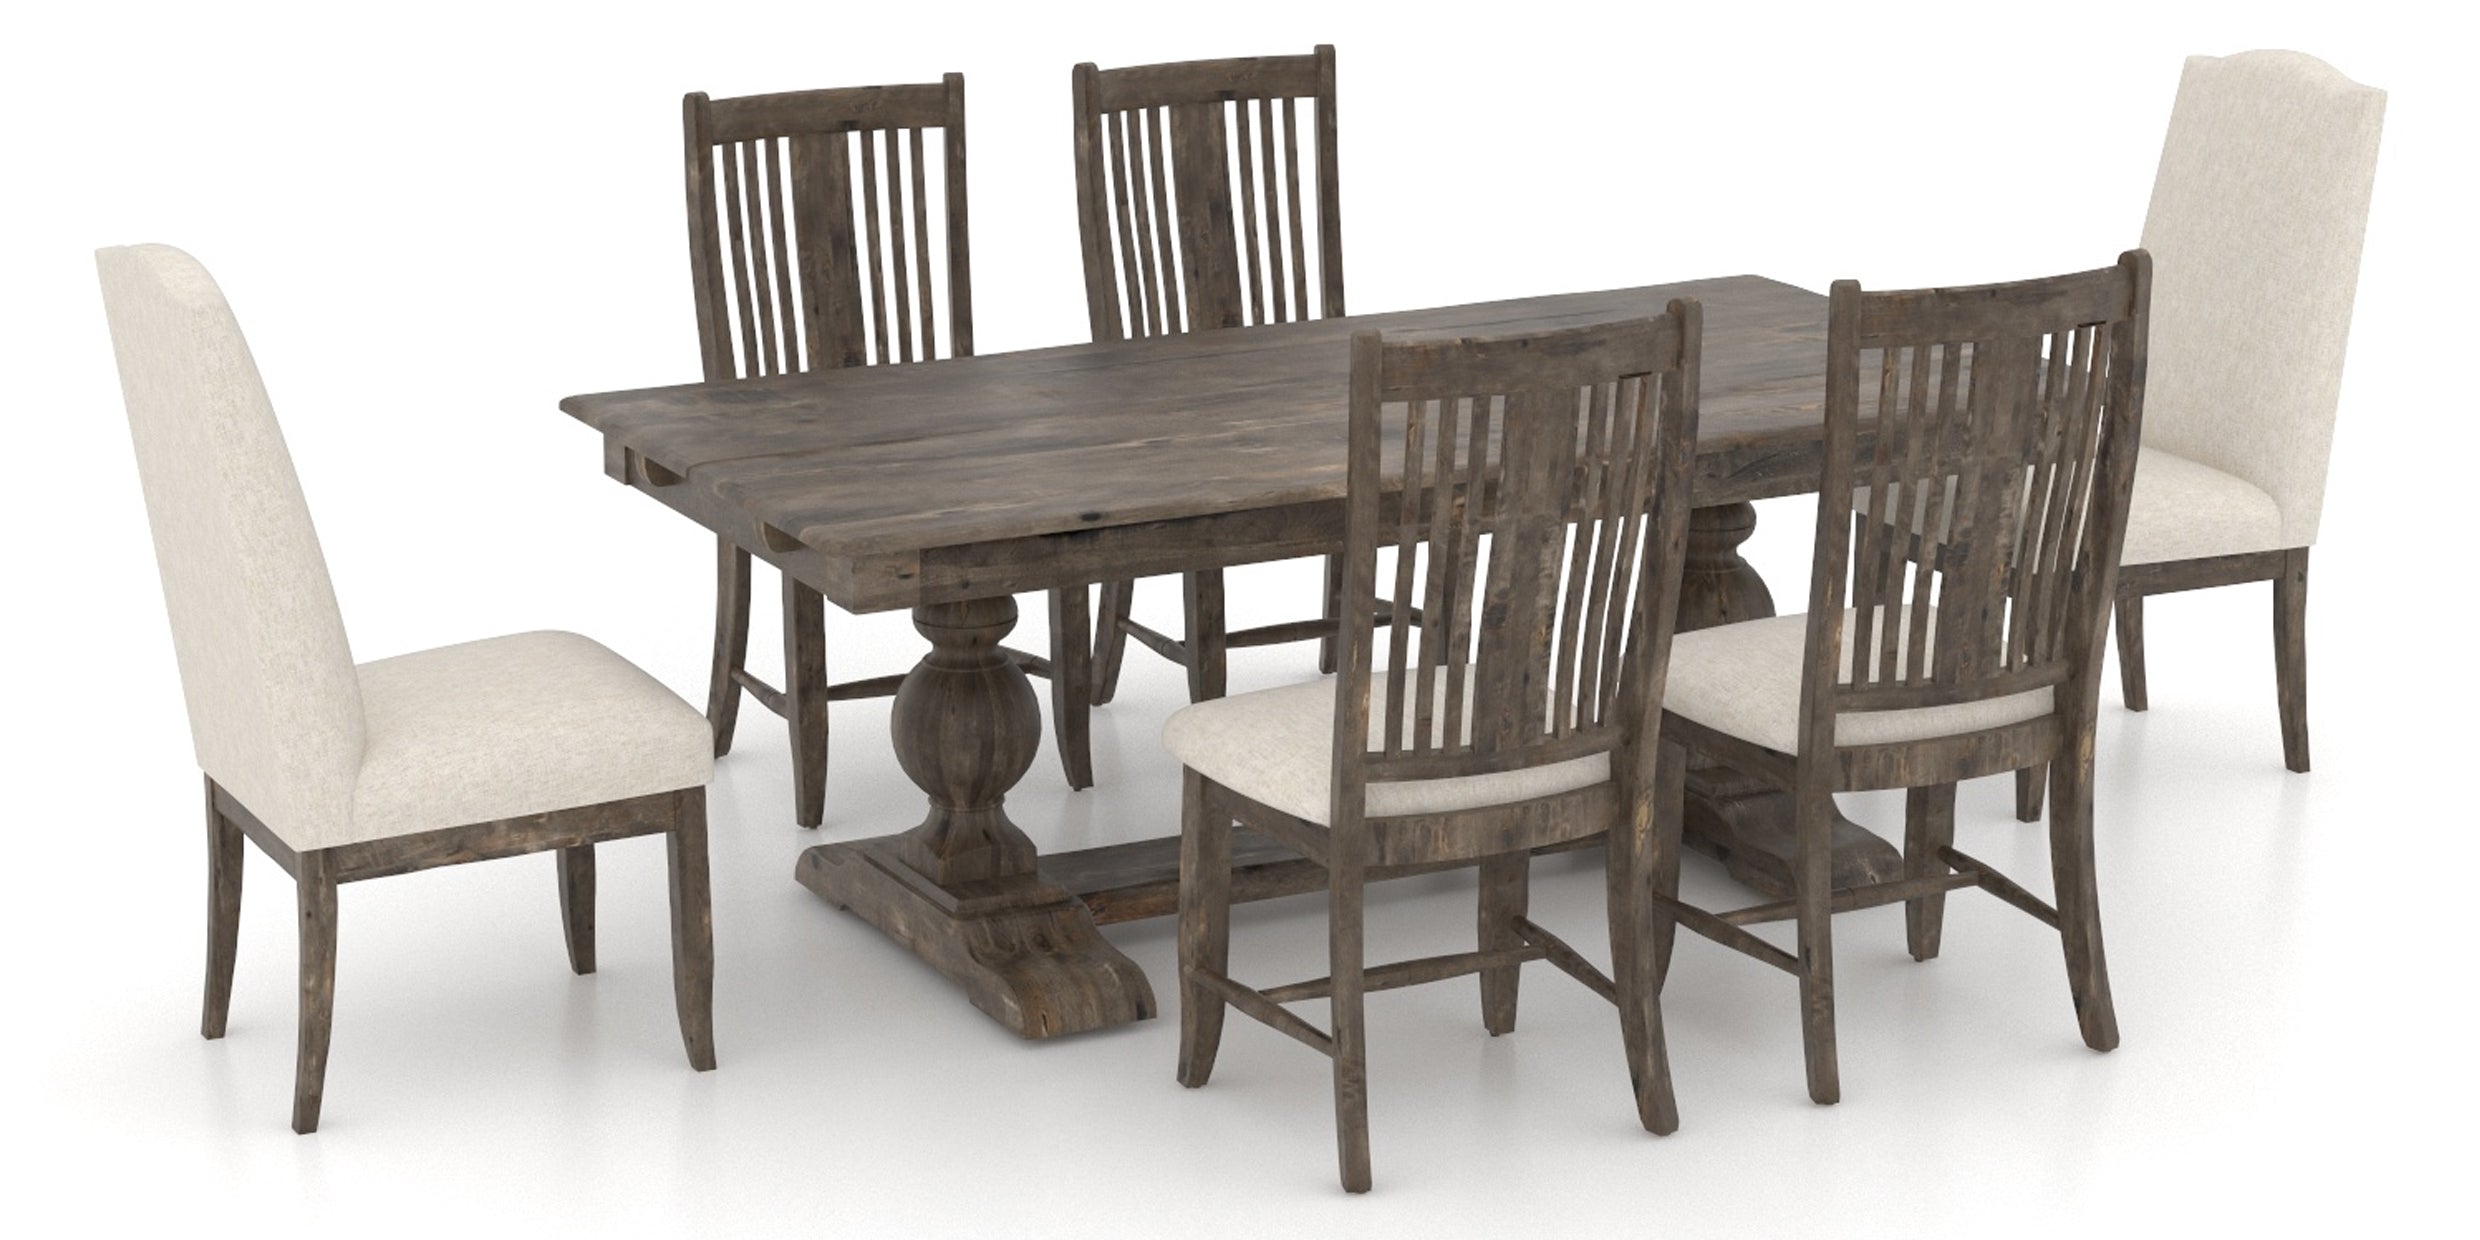 Shadow Birch with Distressed Finish and 7Q Fabric | Canadel Champlain 4280 Dining Set | Valley Ridge Furniture